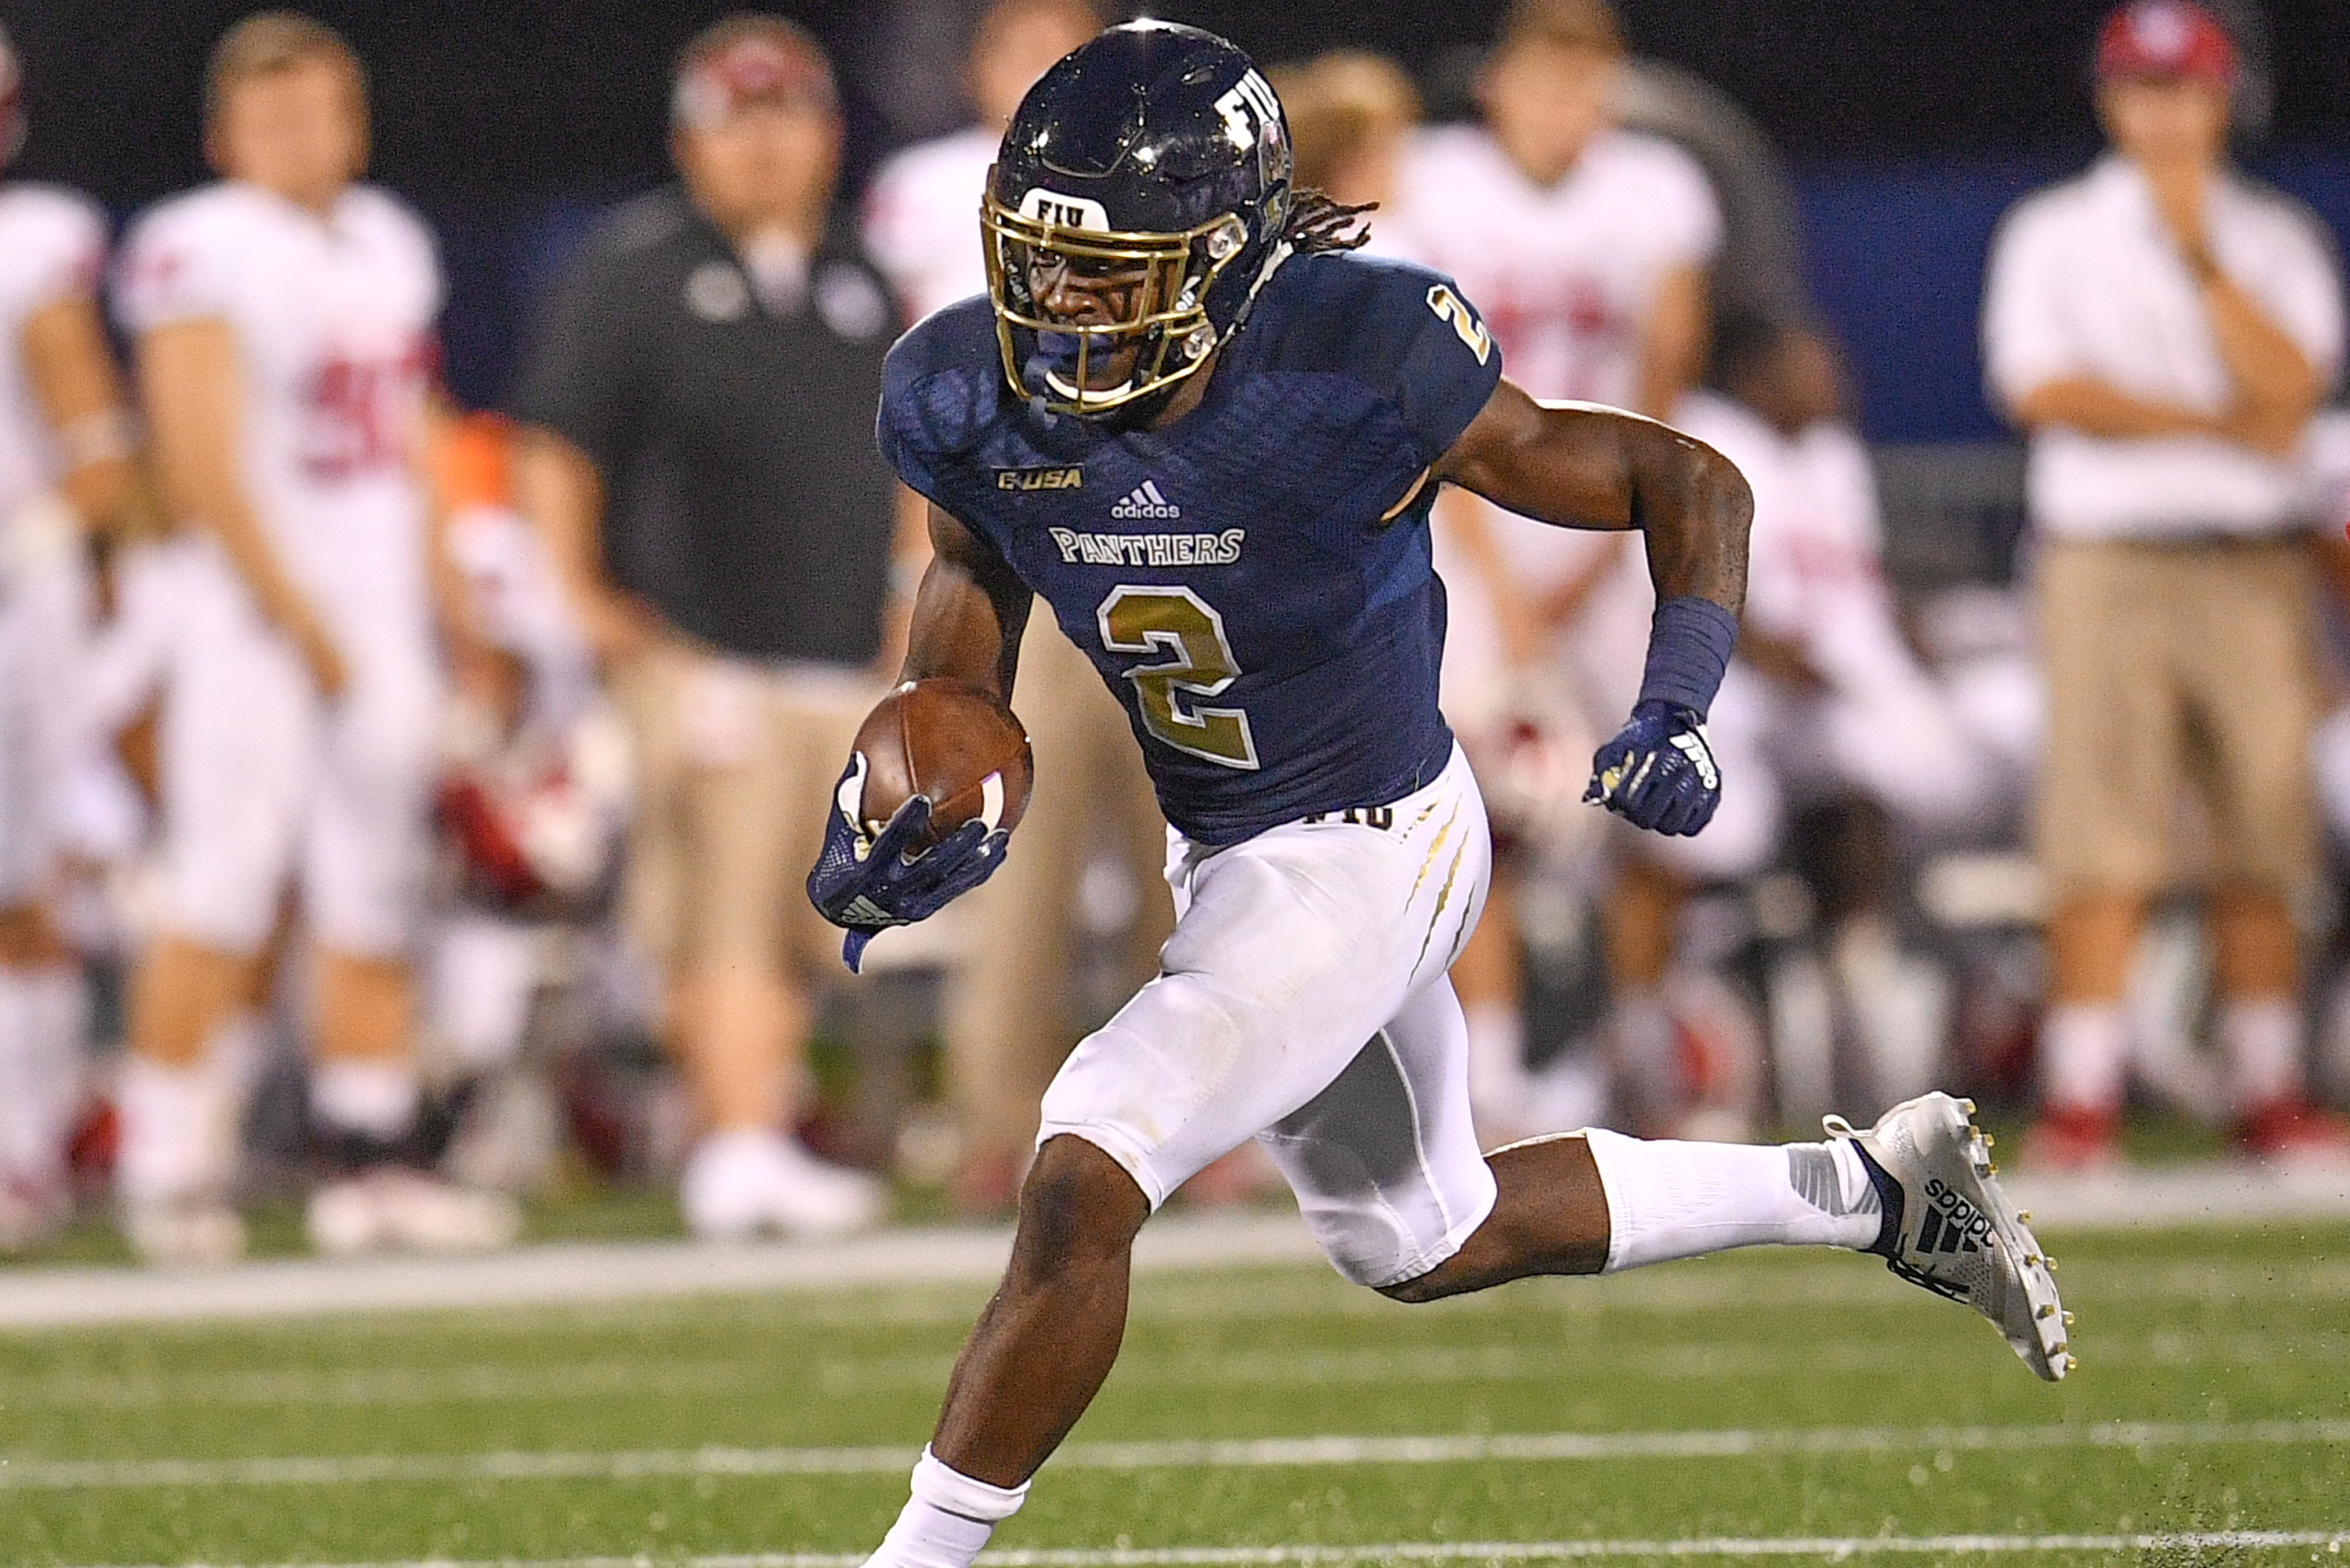 Fiu Rb Anthony Jones Ol Mershawn Miller Injured In Shooting Bleacher Report Latest News Videos And Highlights